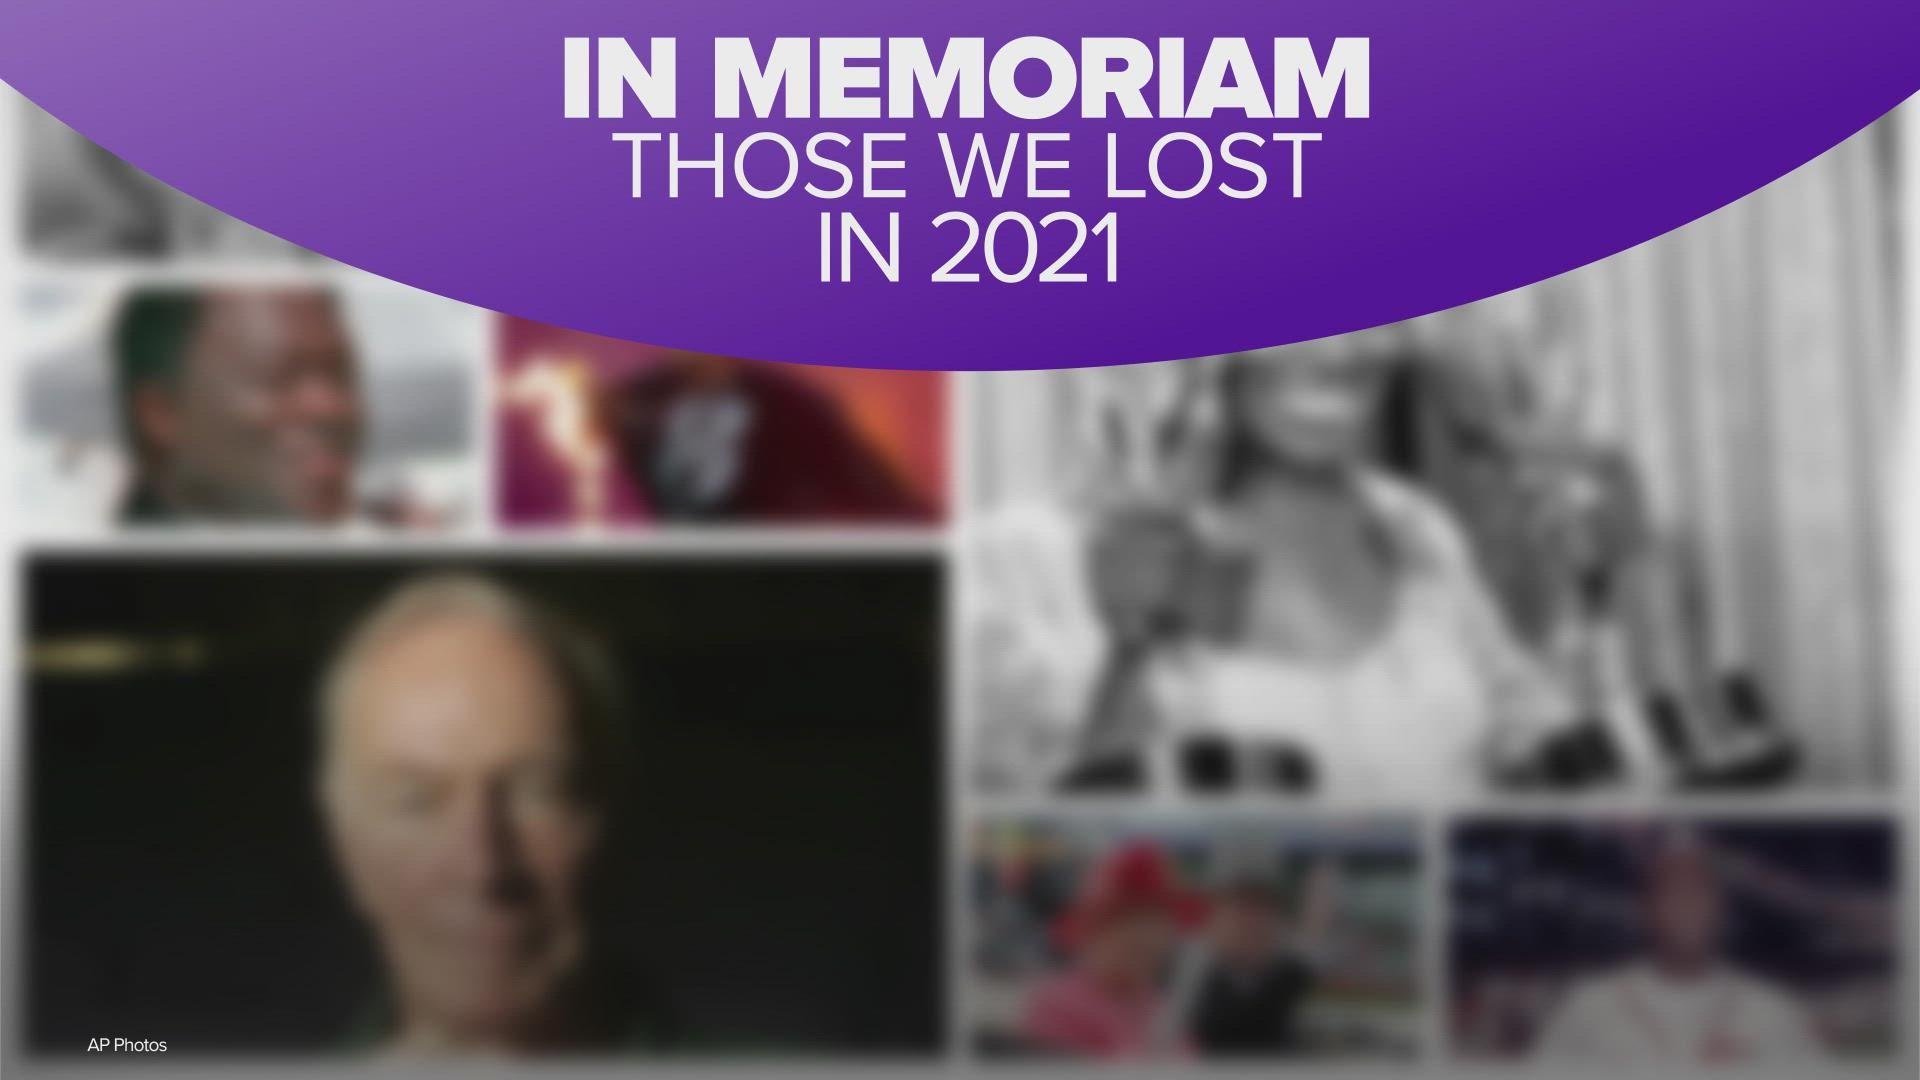 From Christopher Plummer and Hank Aaron to Cicely Tyson, DMX and Colin Powell, here is a look at some of those we lost in 2021.